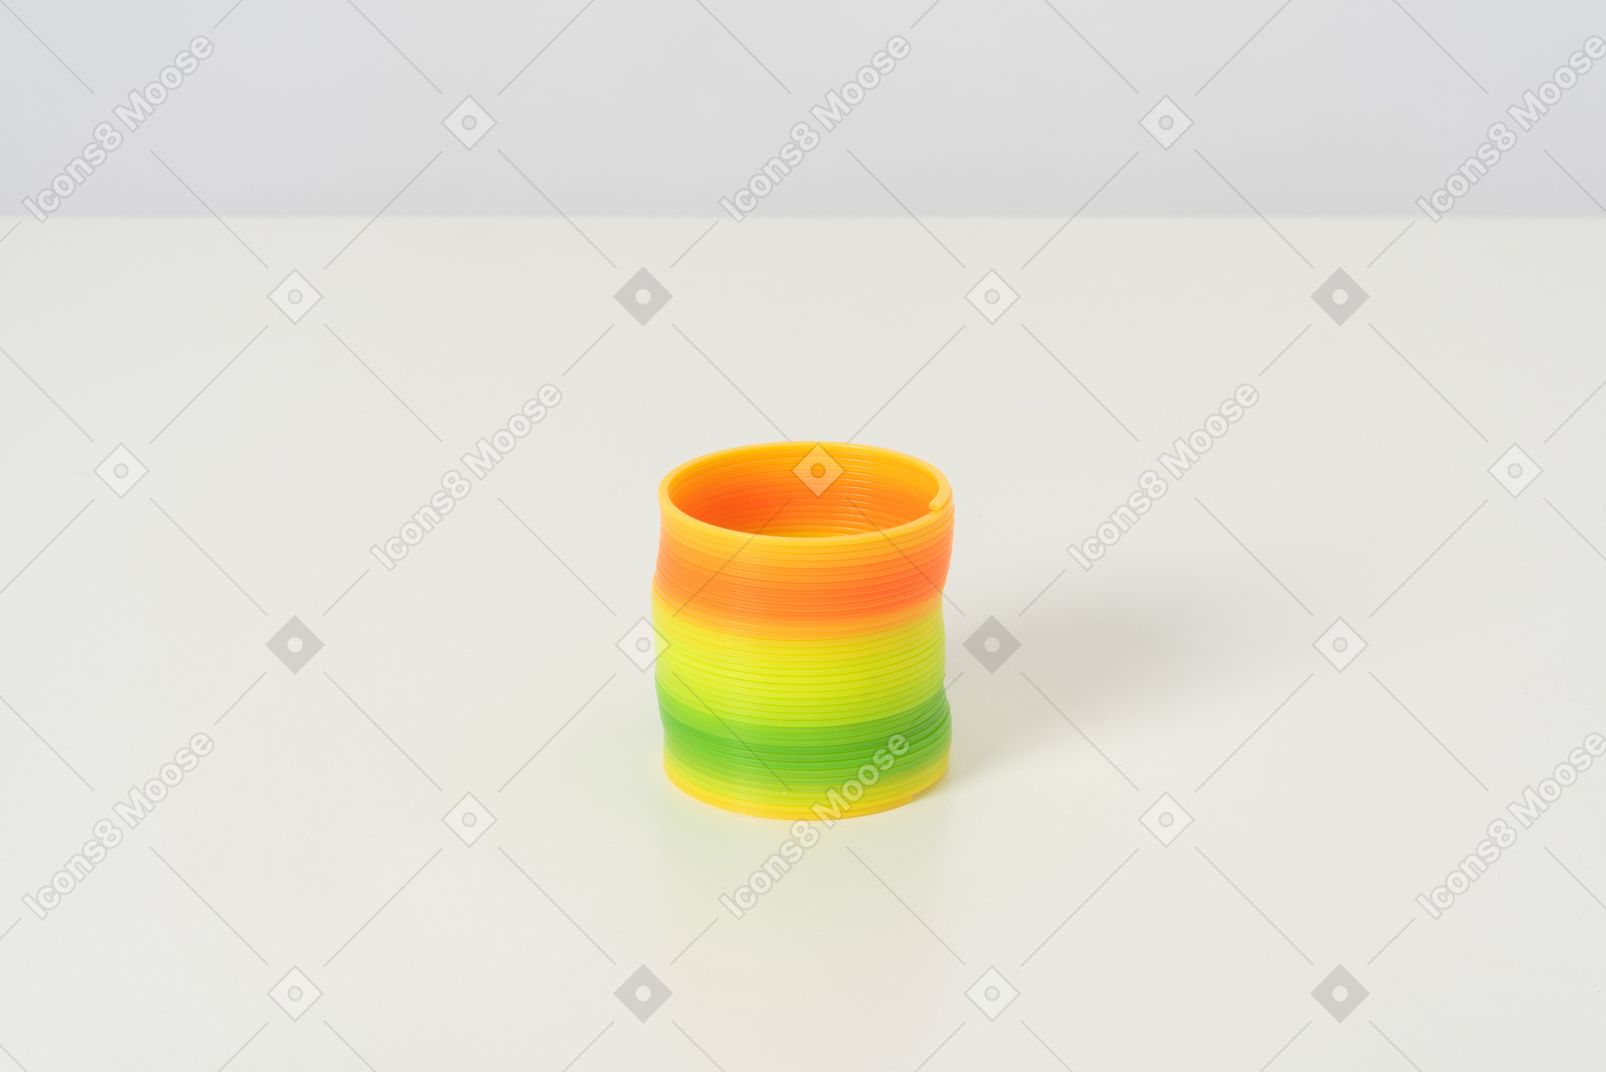 A colorful slinky toy in its default state